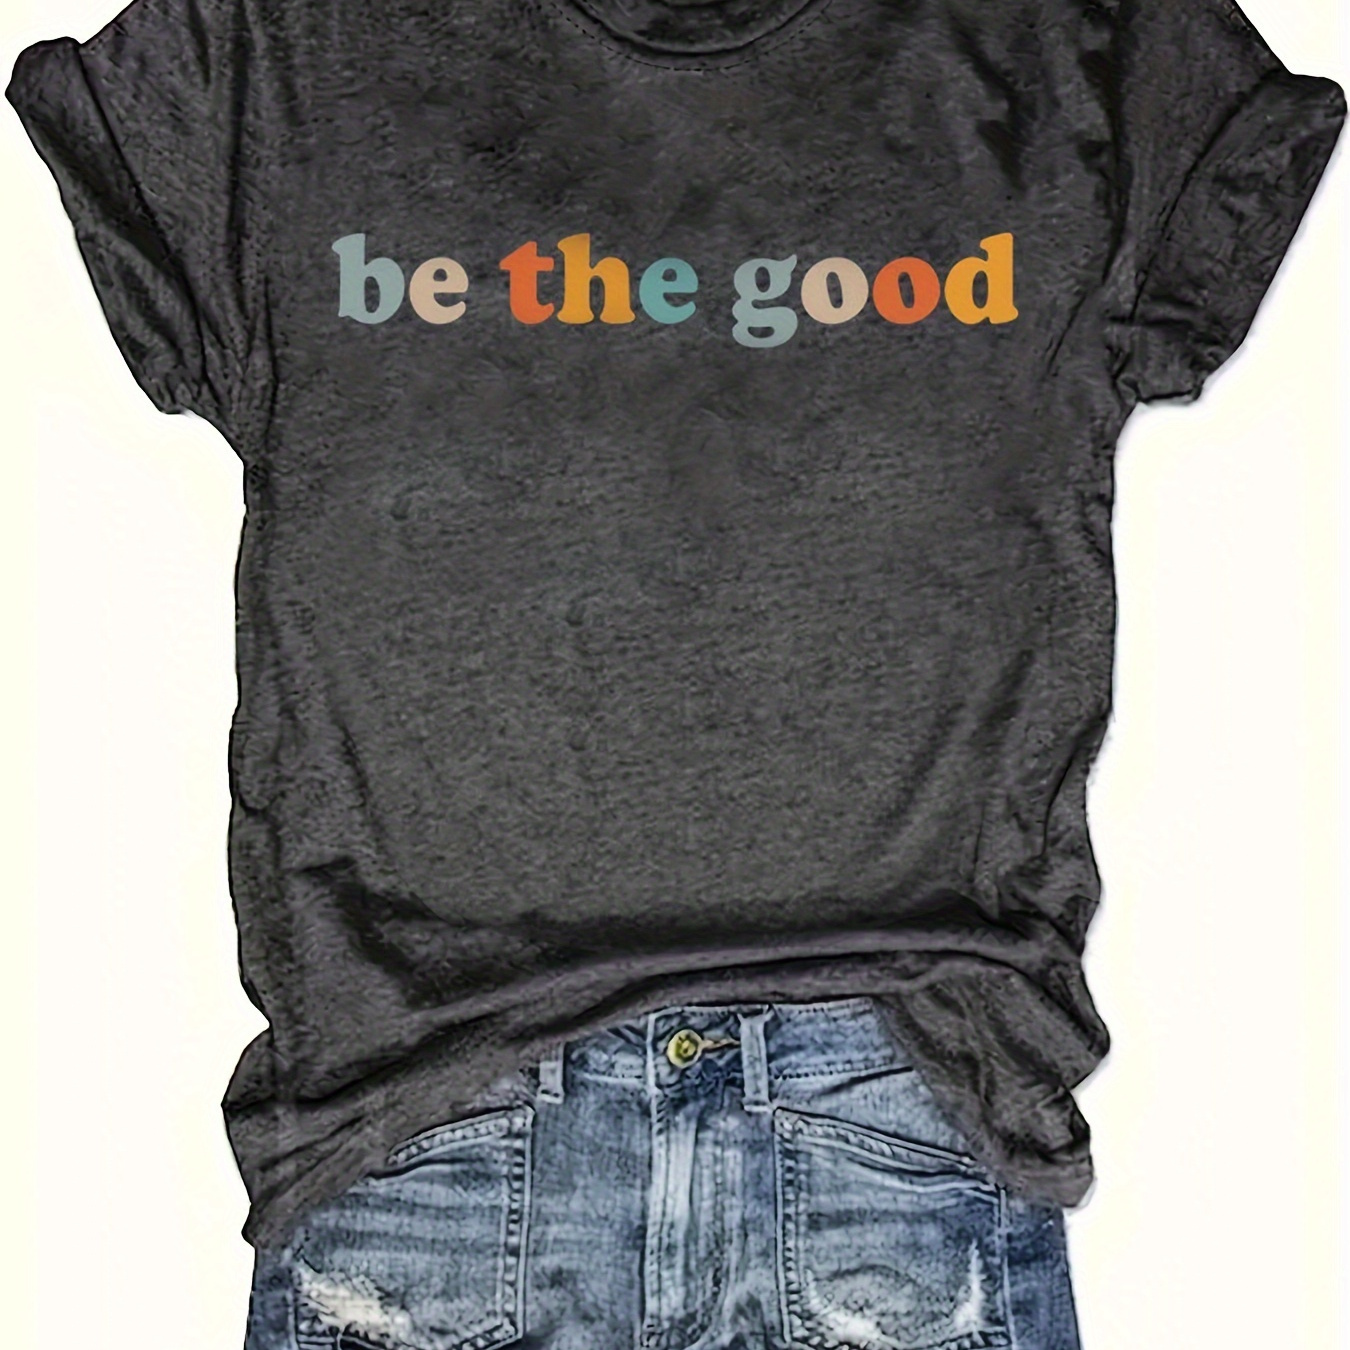 

Be The Good Print T-shirt, Casual Short Sleeve Crew Neck Summer Top, Women's Clothing